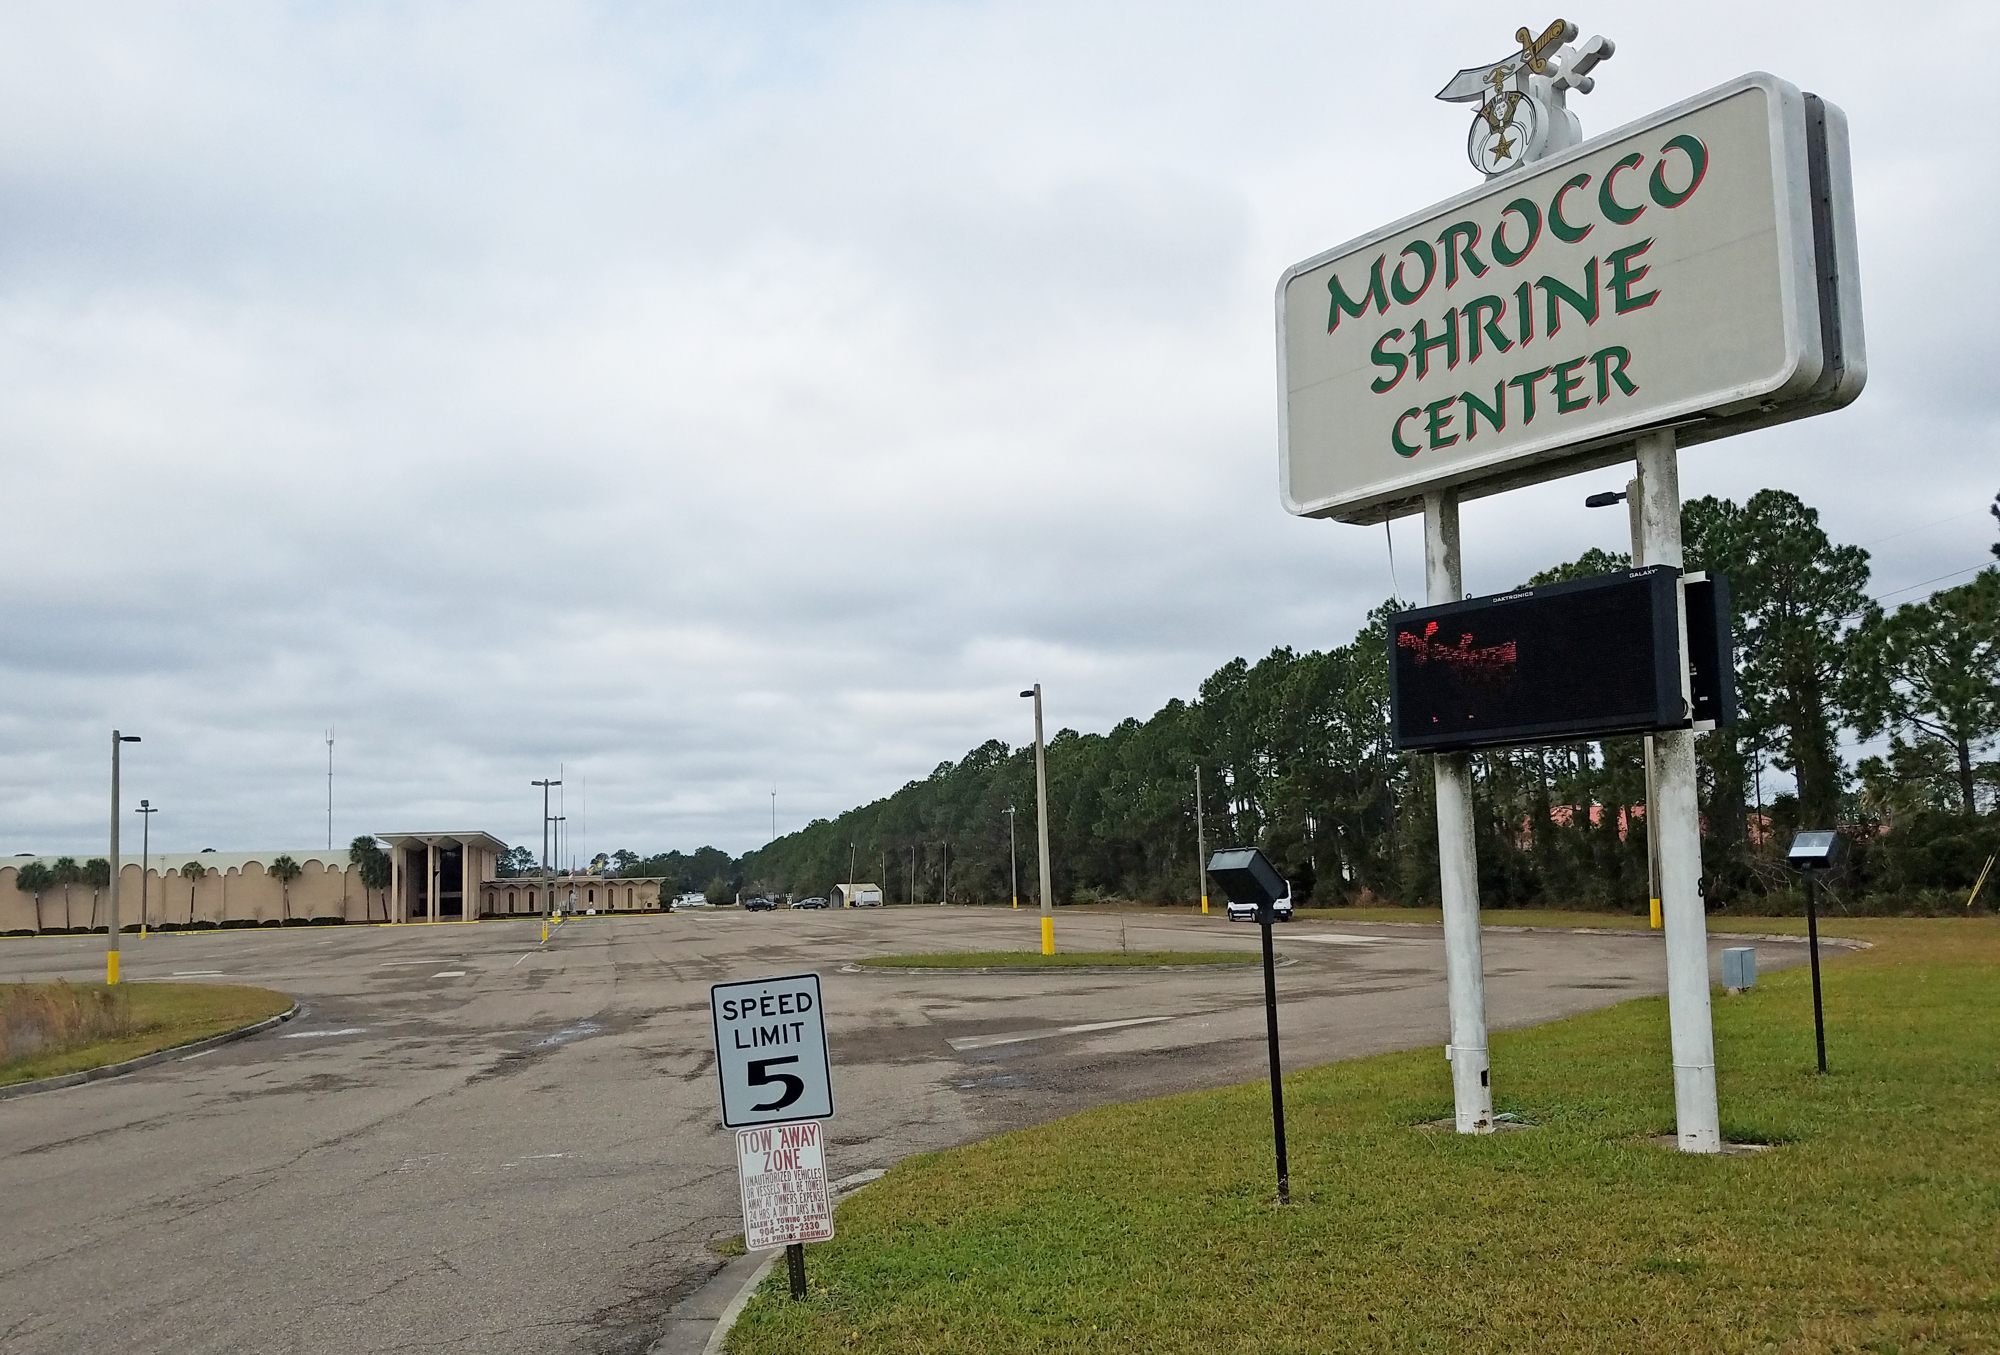 The Shriners sold its 37-acre Morocco Shrine Center property at 3800 St. Johns Bluff Road.